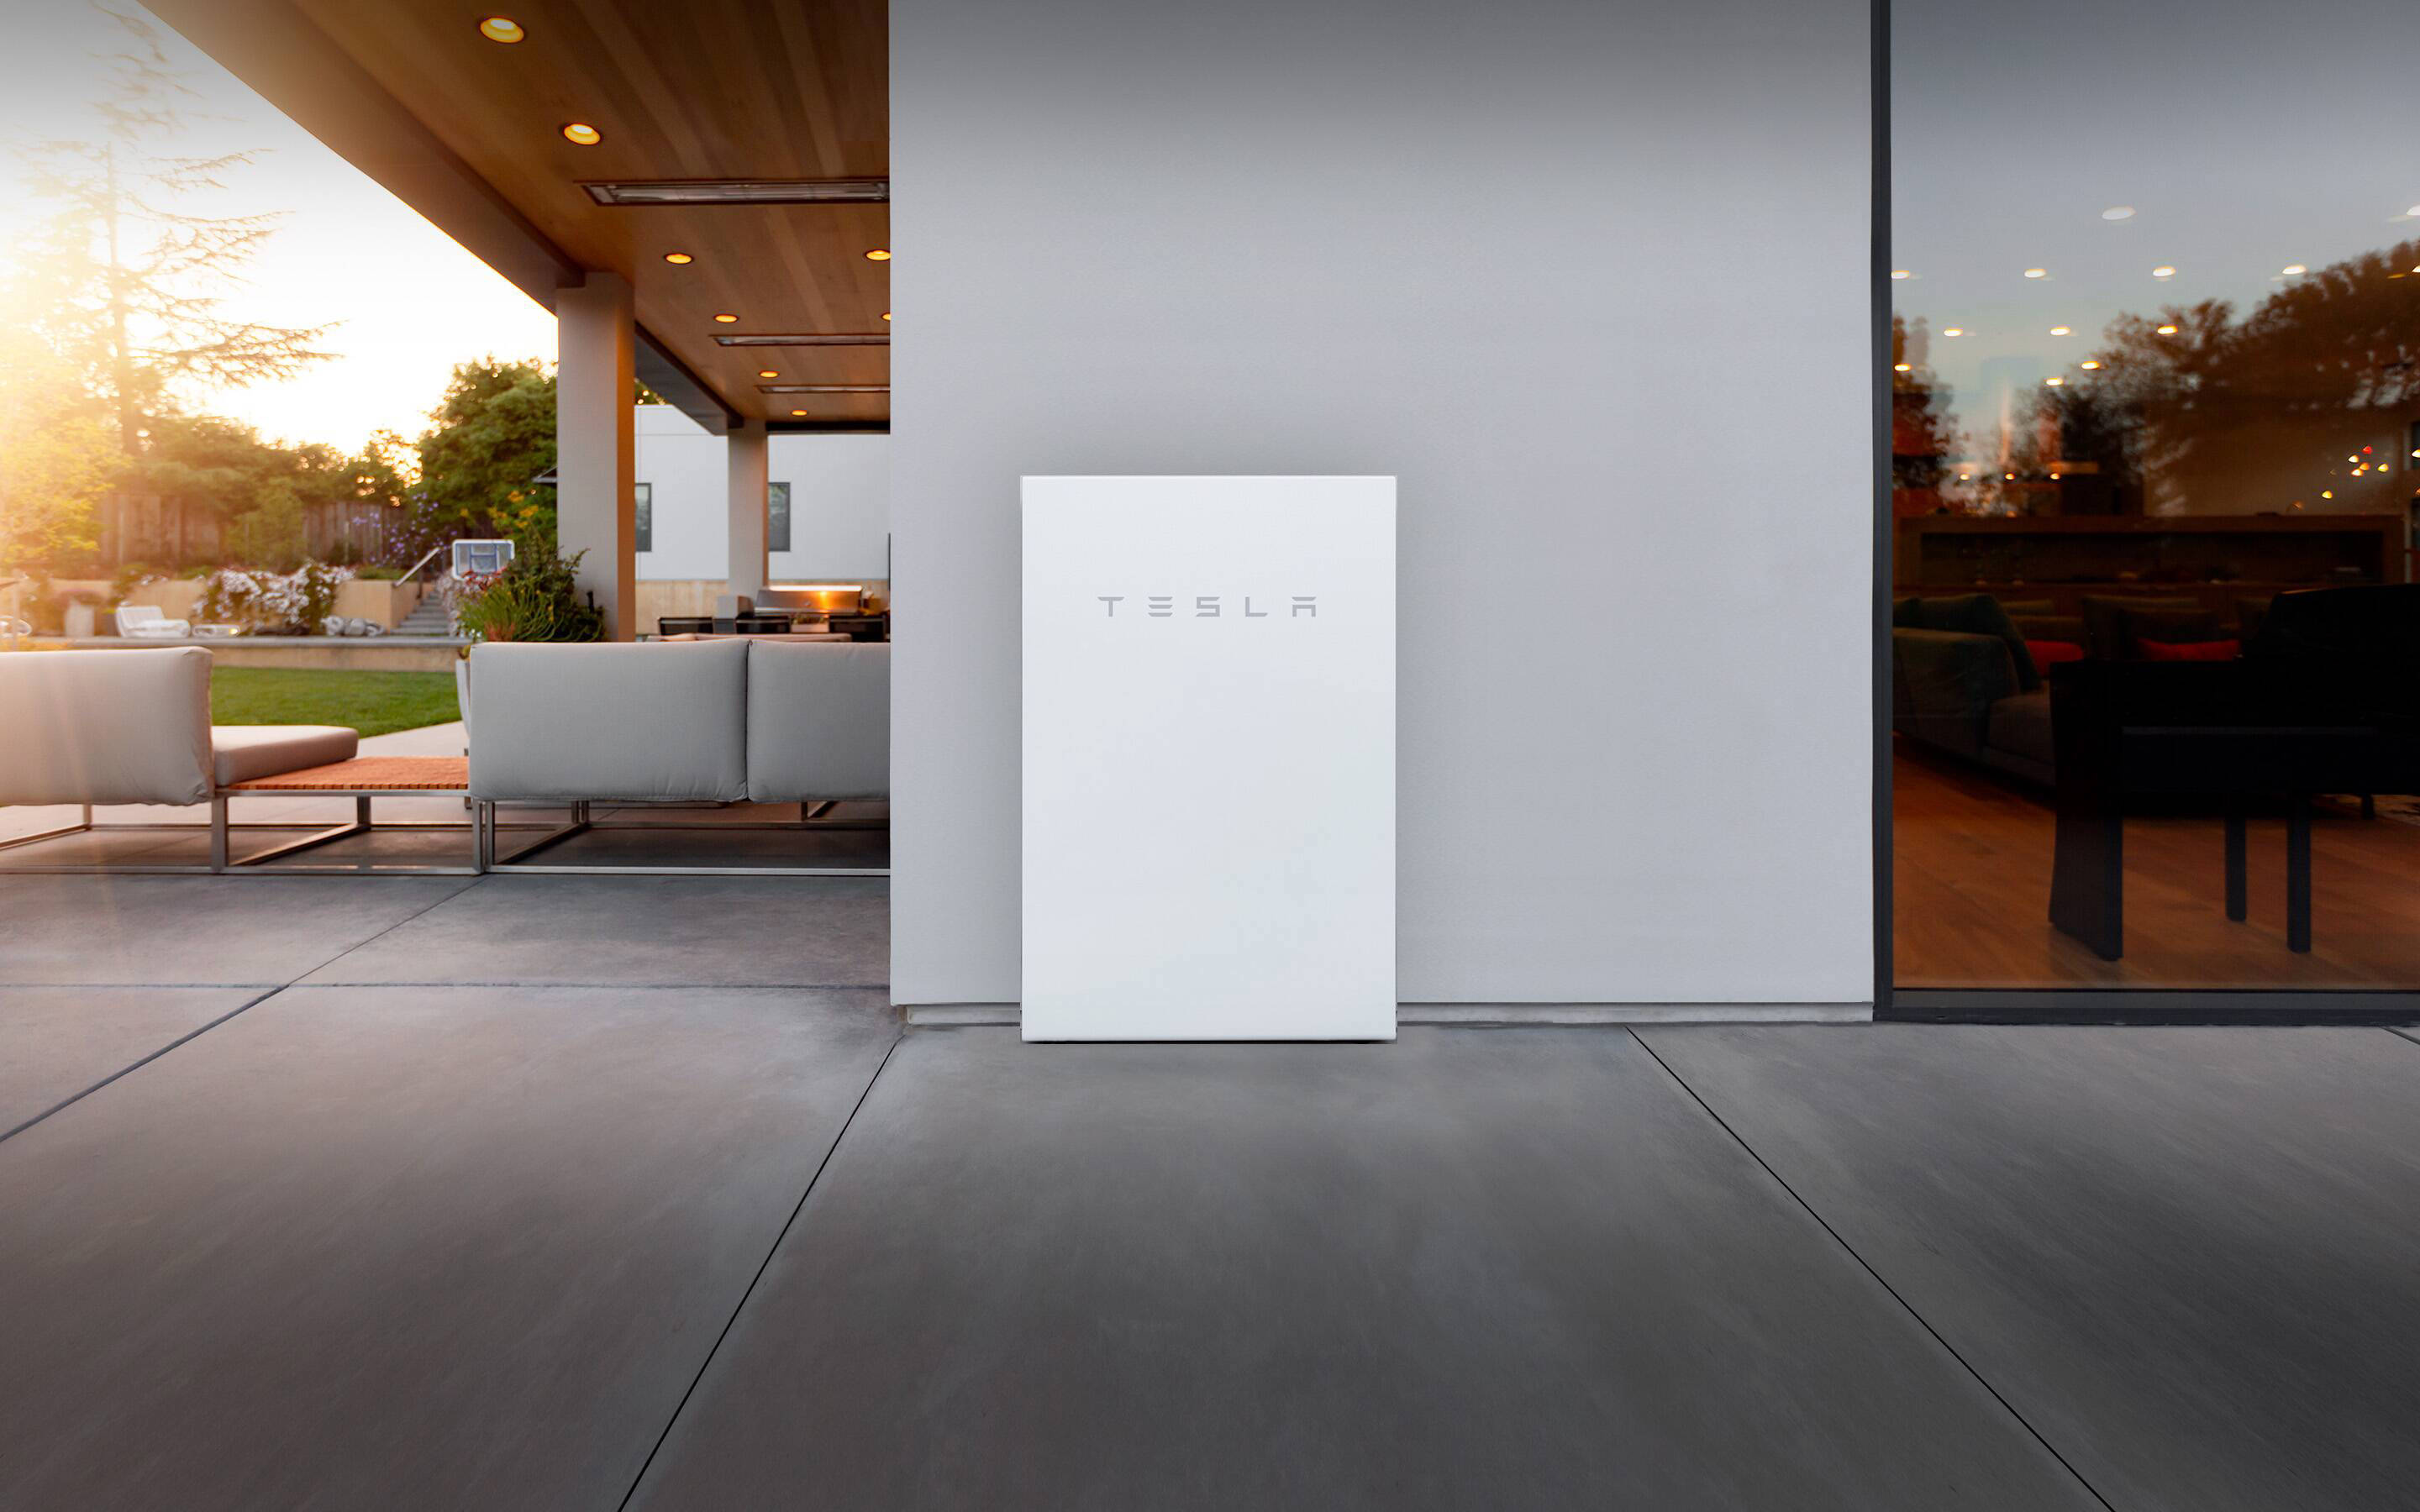 tesla-expands-powerwall-to-grid-program-to-cover-most-of-california